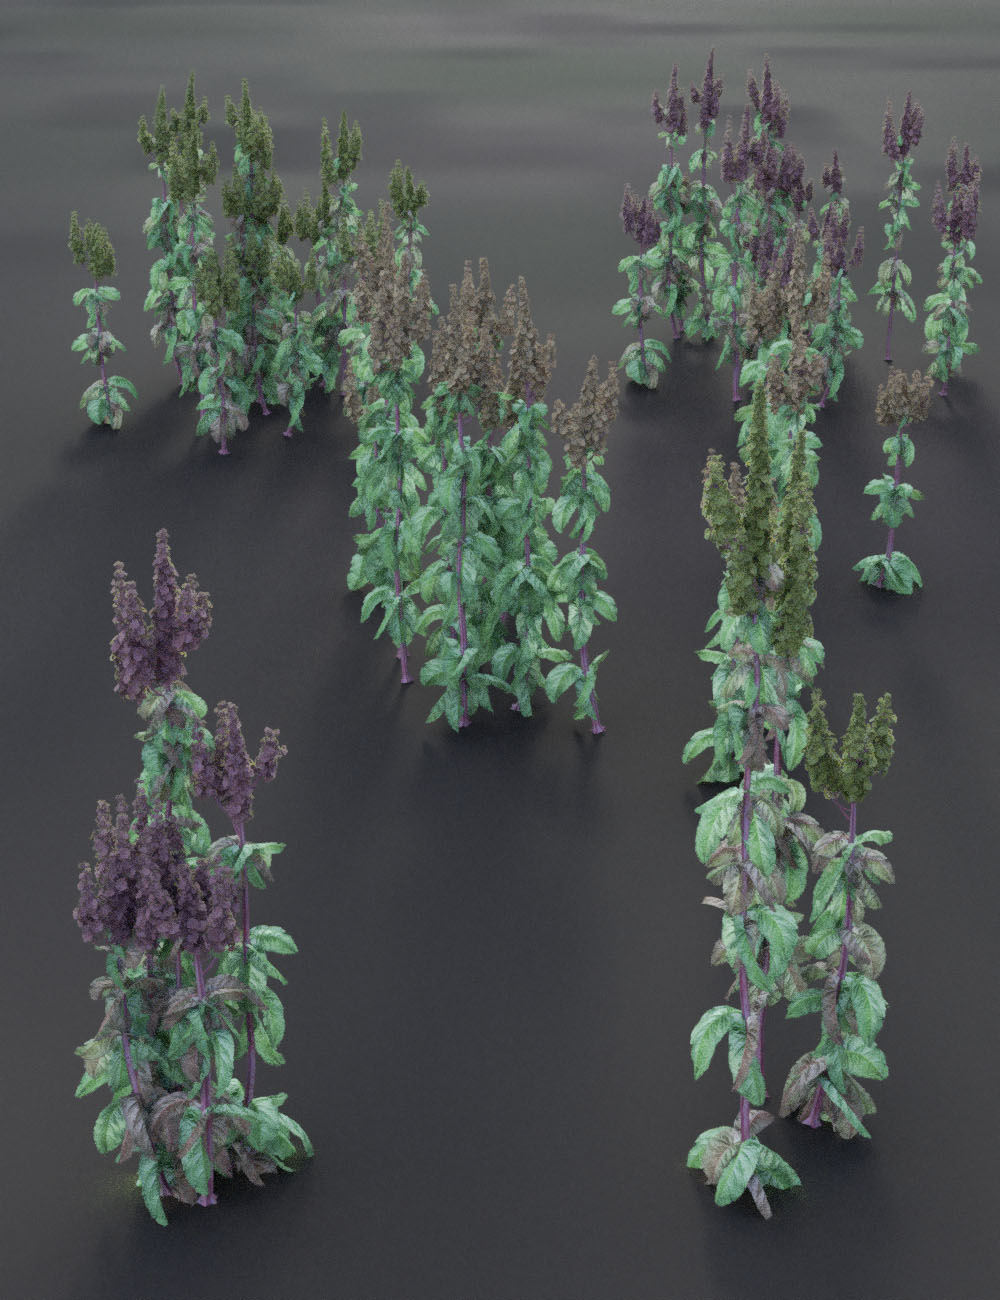 Wildflowers  - Tall Weeds and Seed heads by: MartinJFrost, 3D Models by Daz 3D